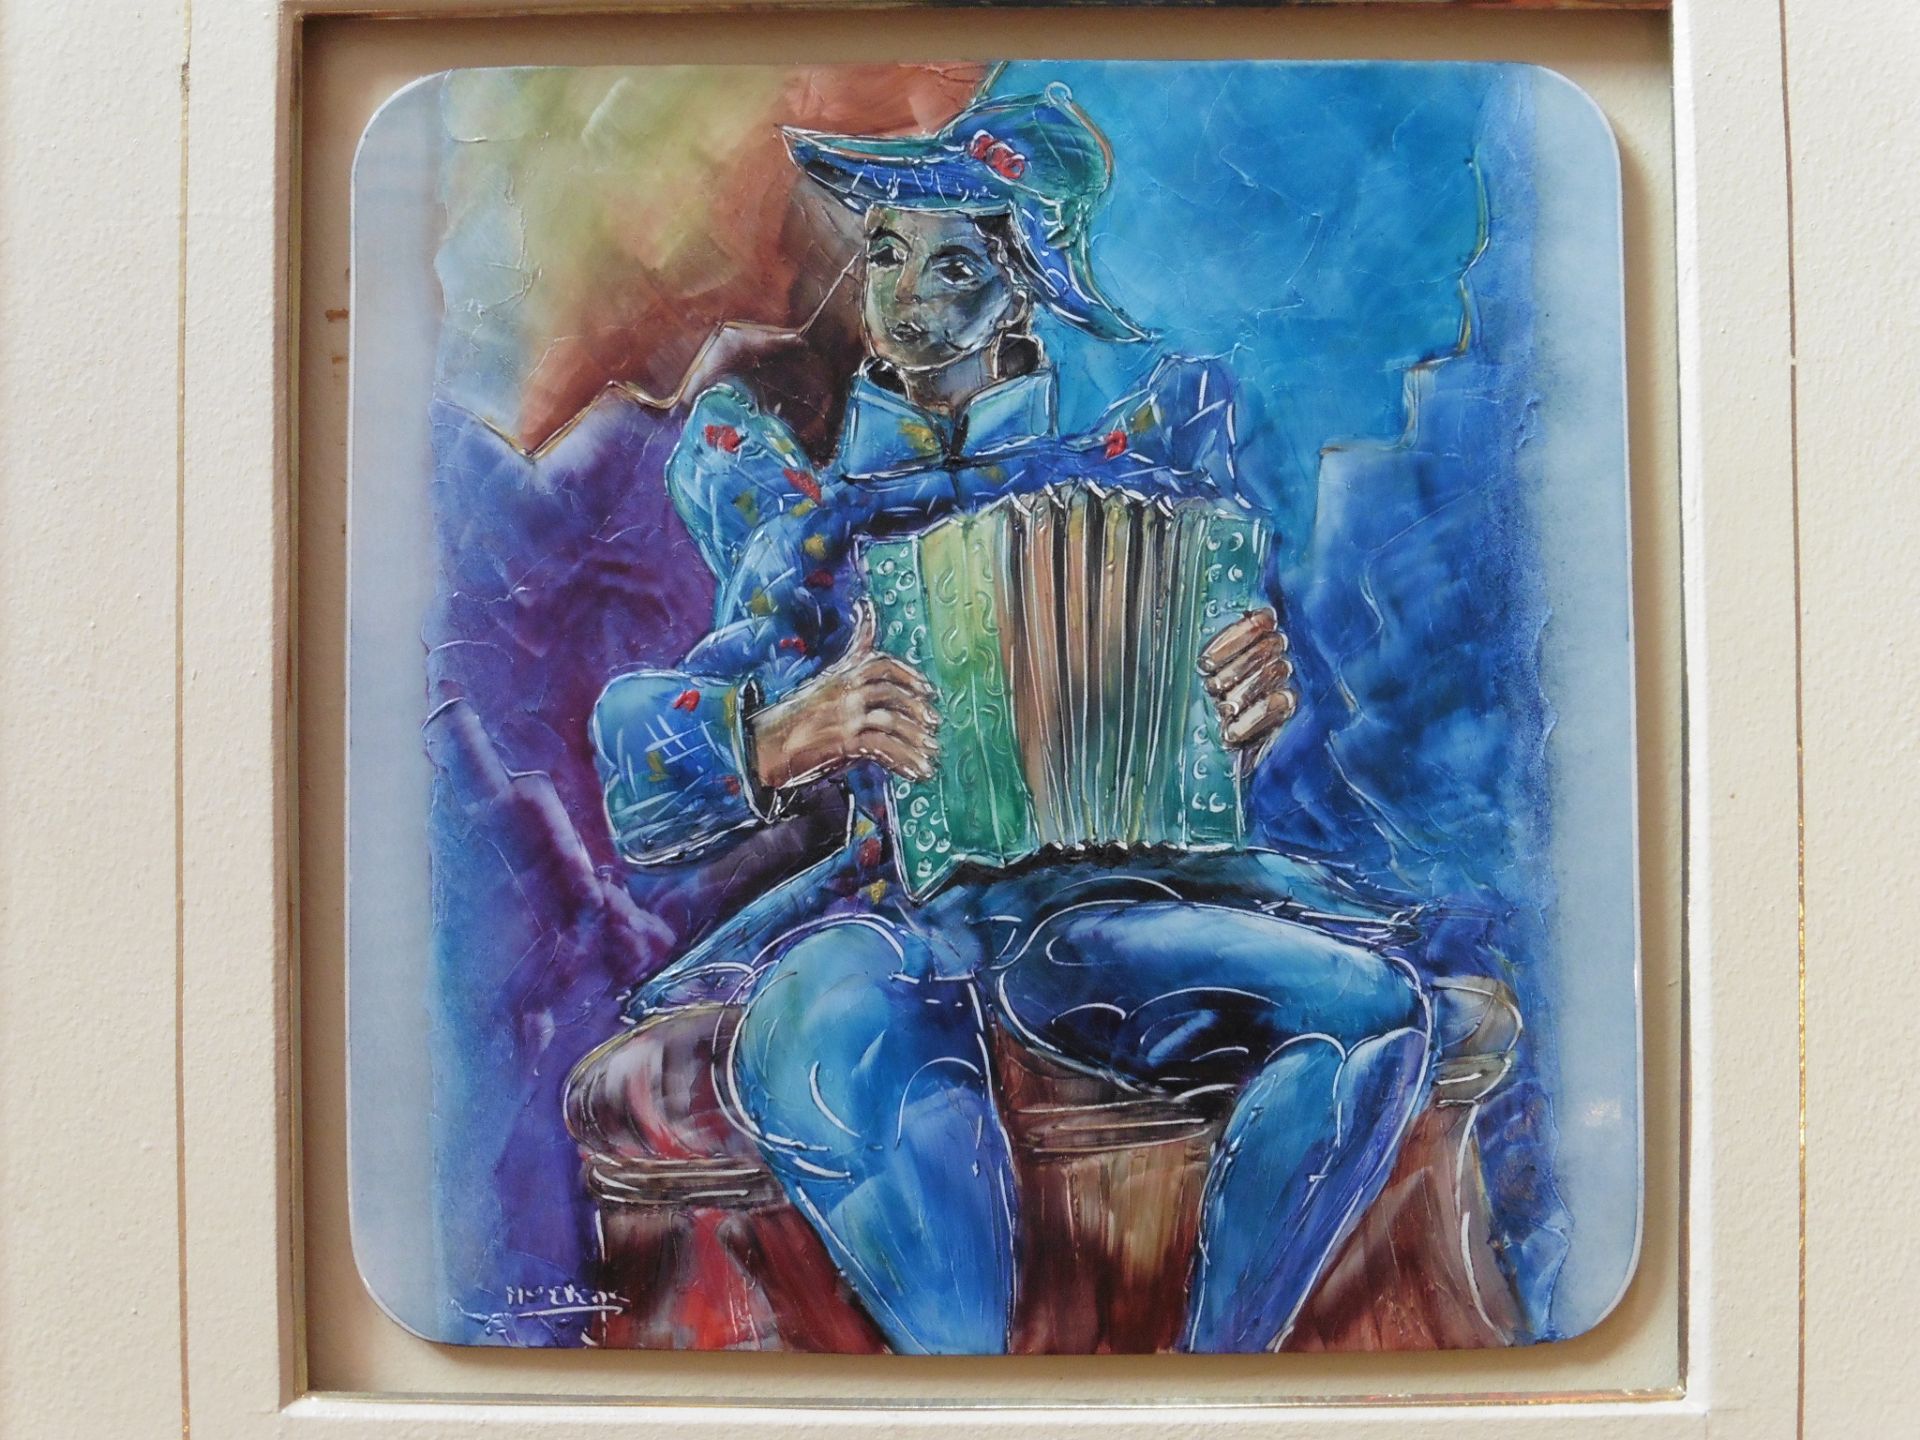 Framed painted ceramic tile “The accordion player” indistinctly signed within the tile - Image 2 of 6